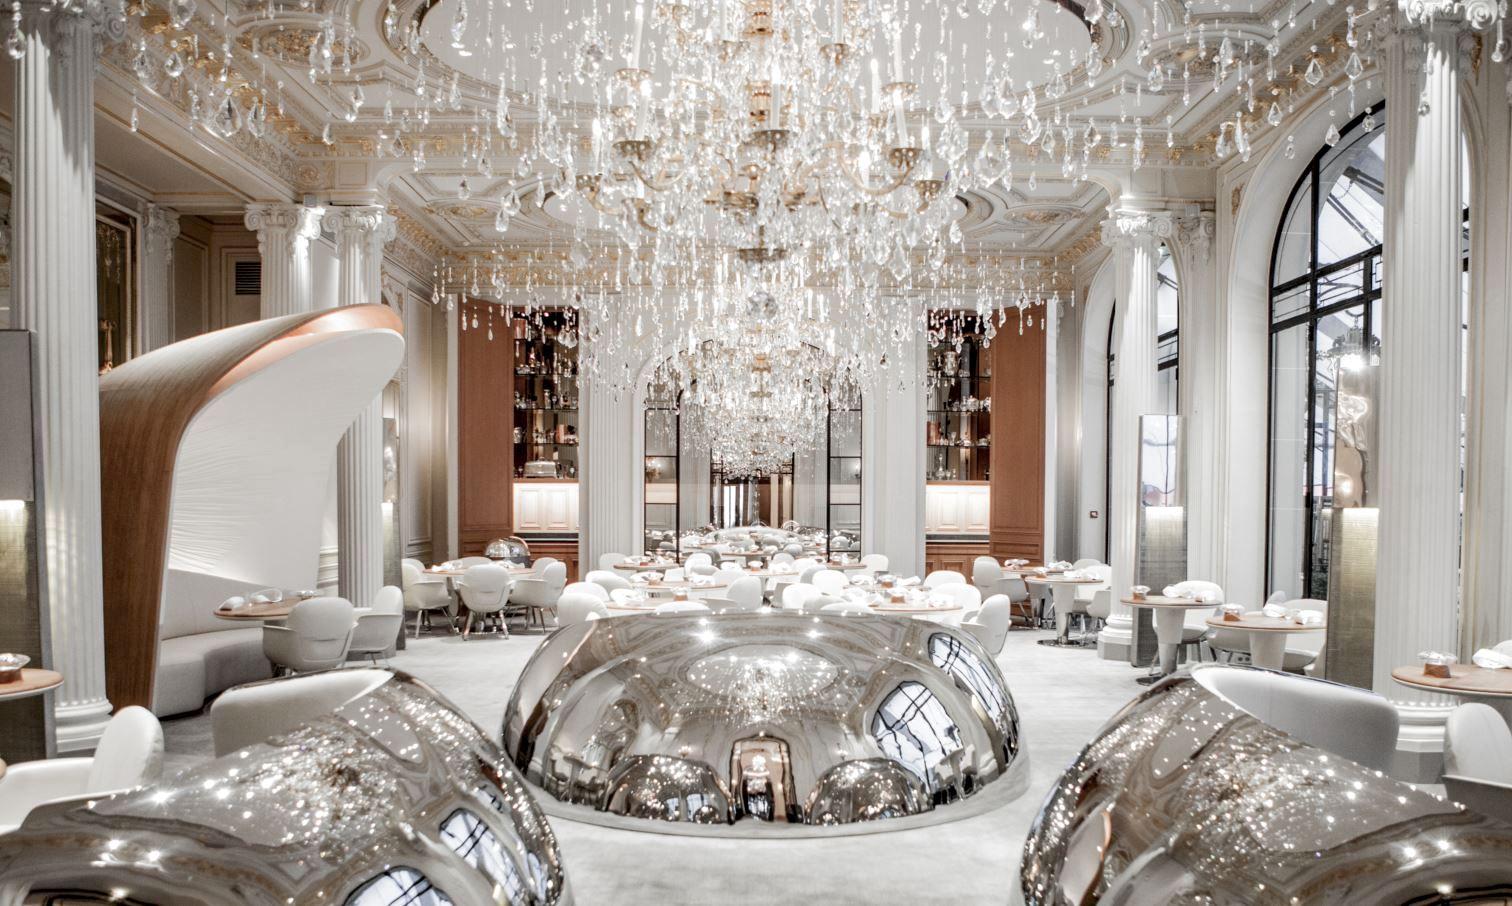 Gigantic glossy steel domes, solid oak tables and a striking chandelier take centre stage in the dining hall